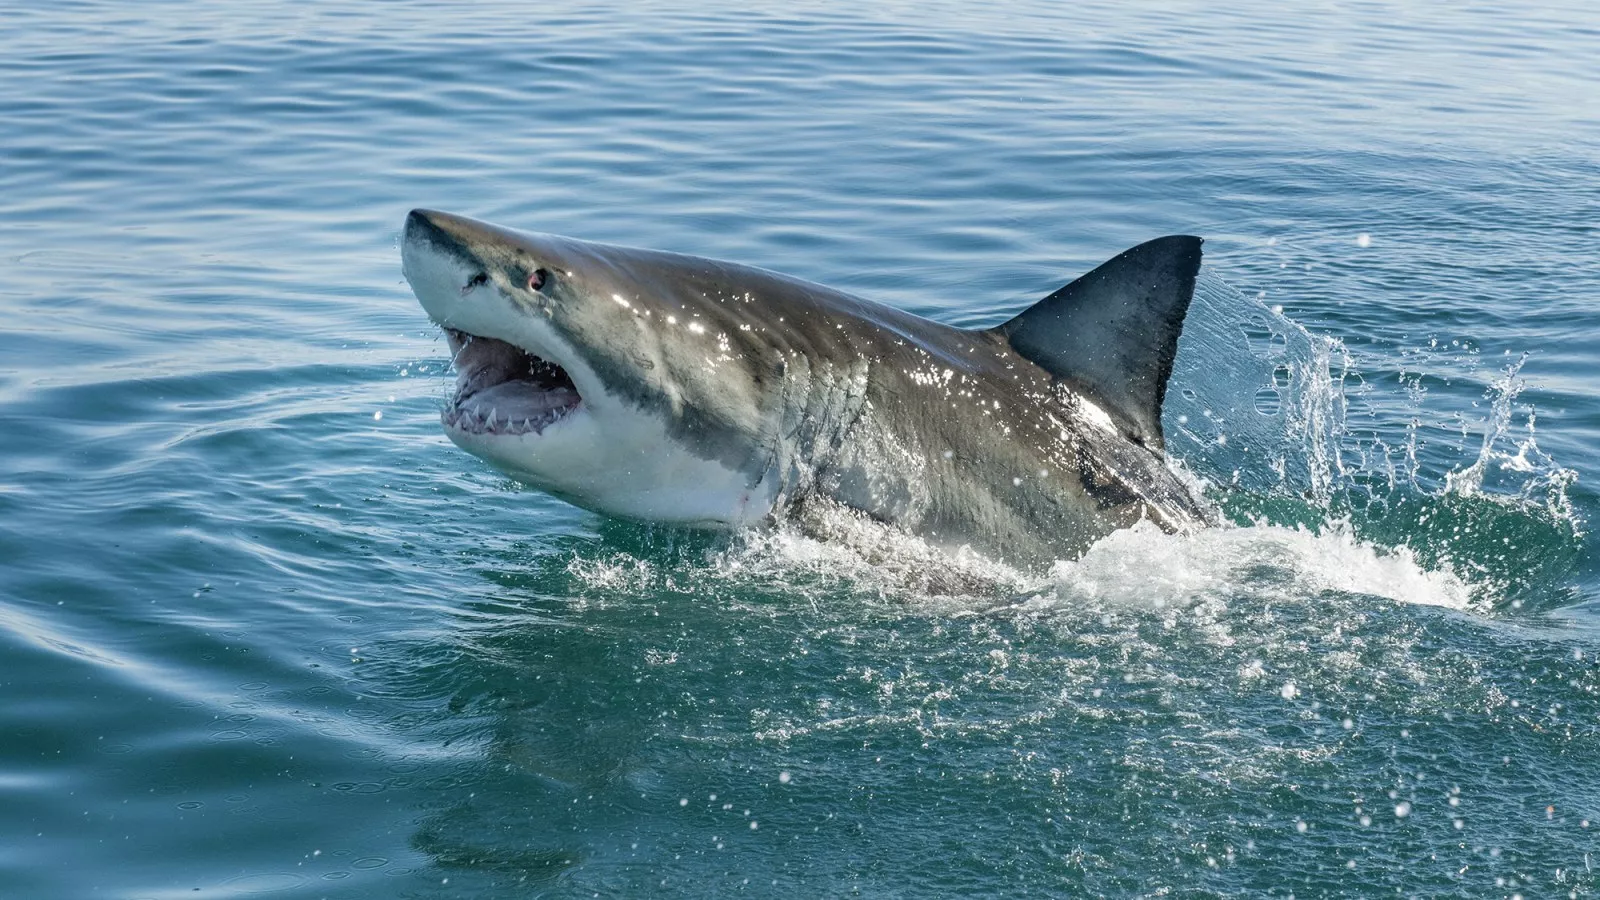 A 10' Great White breeched directly in front of me while surfing #sand, Great White Shark